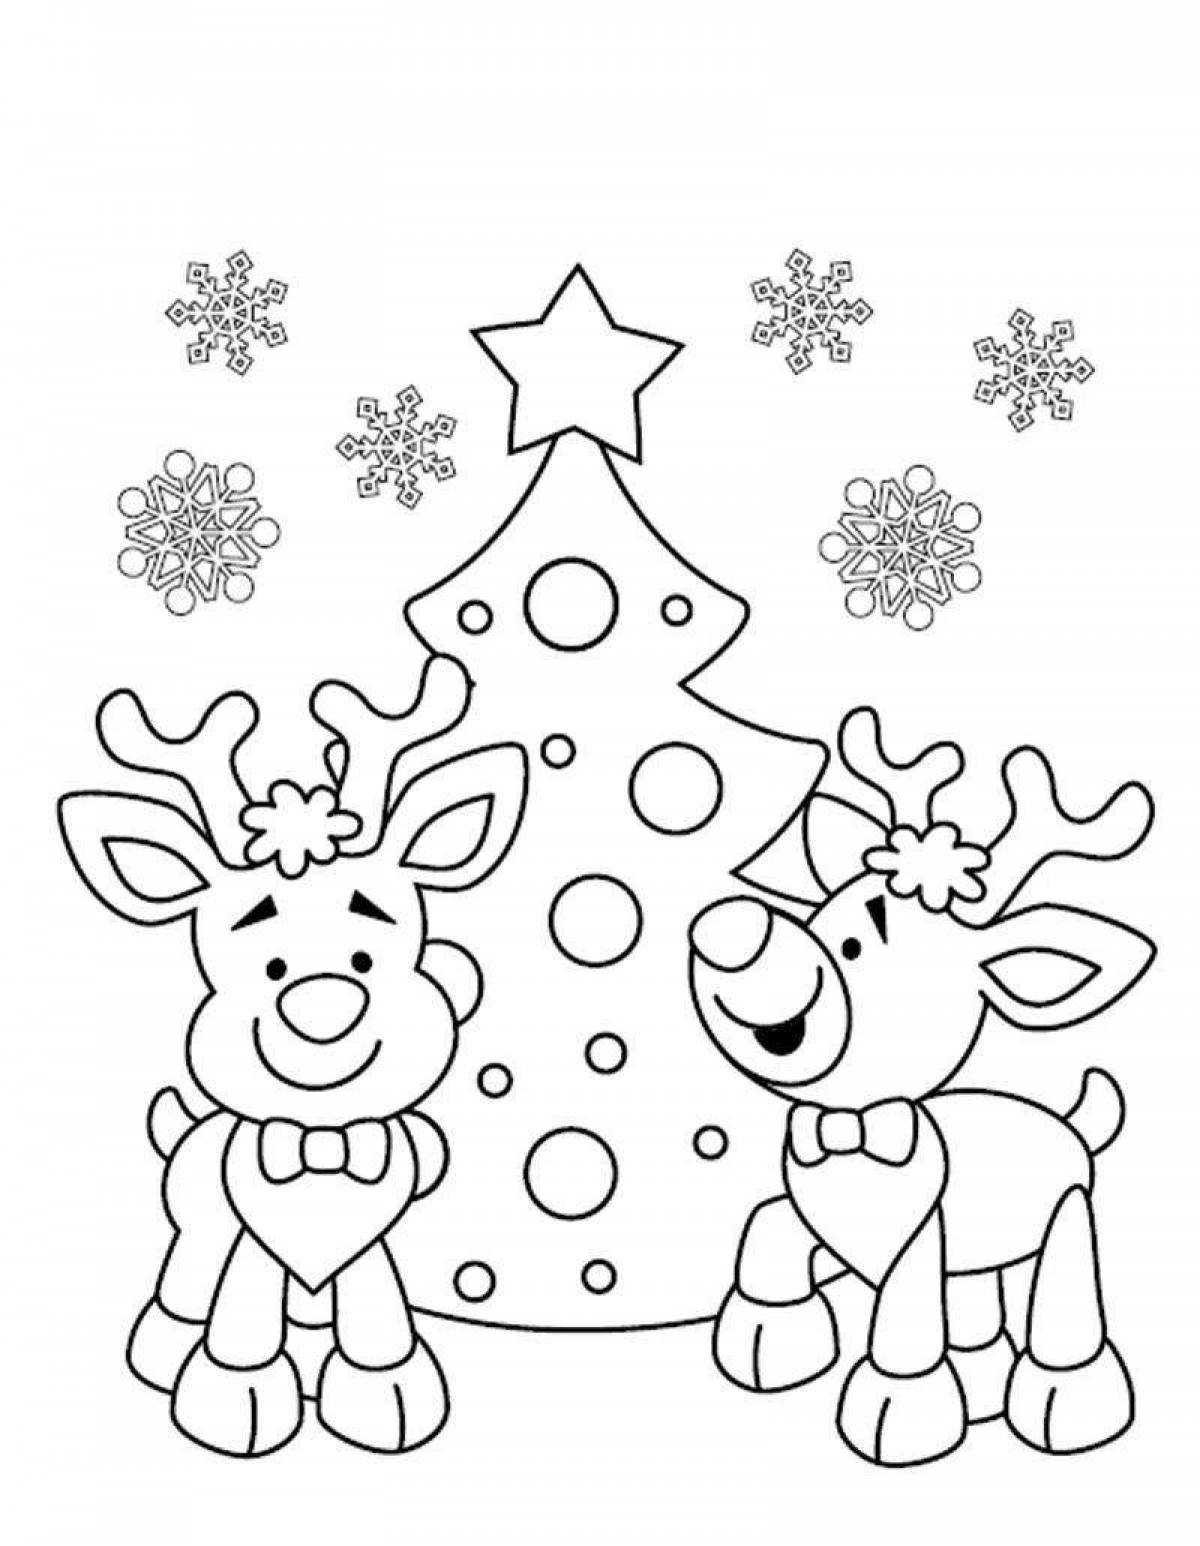 Amazing Christmas coloring book